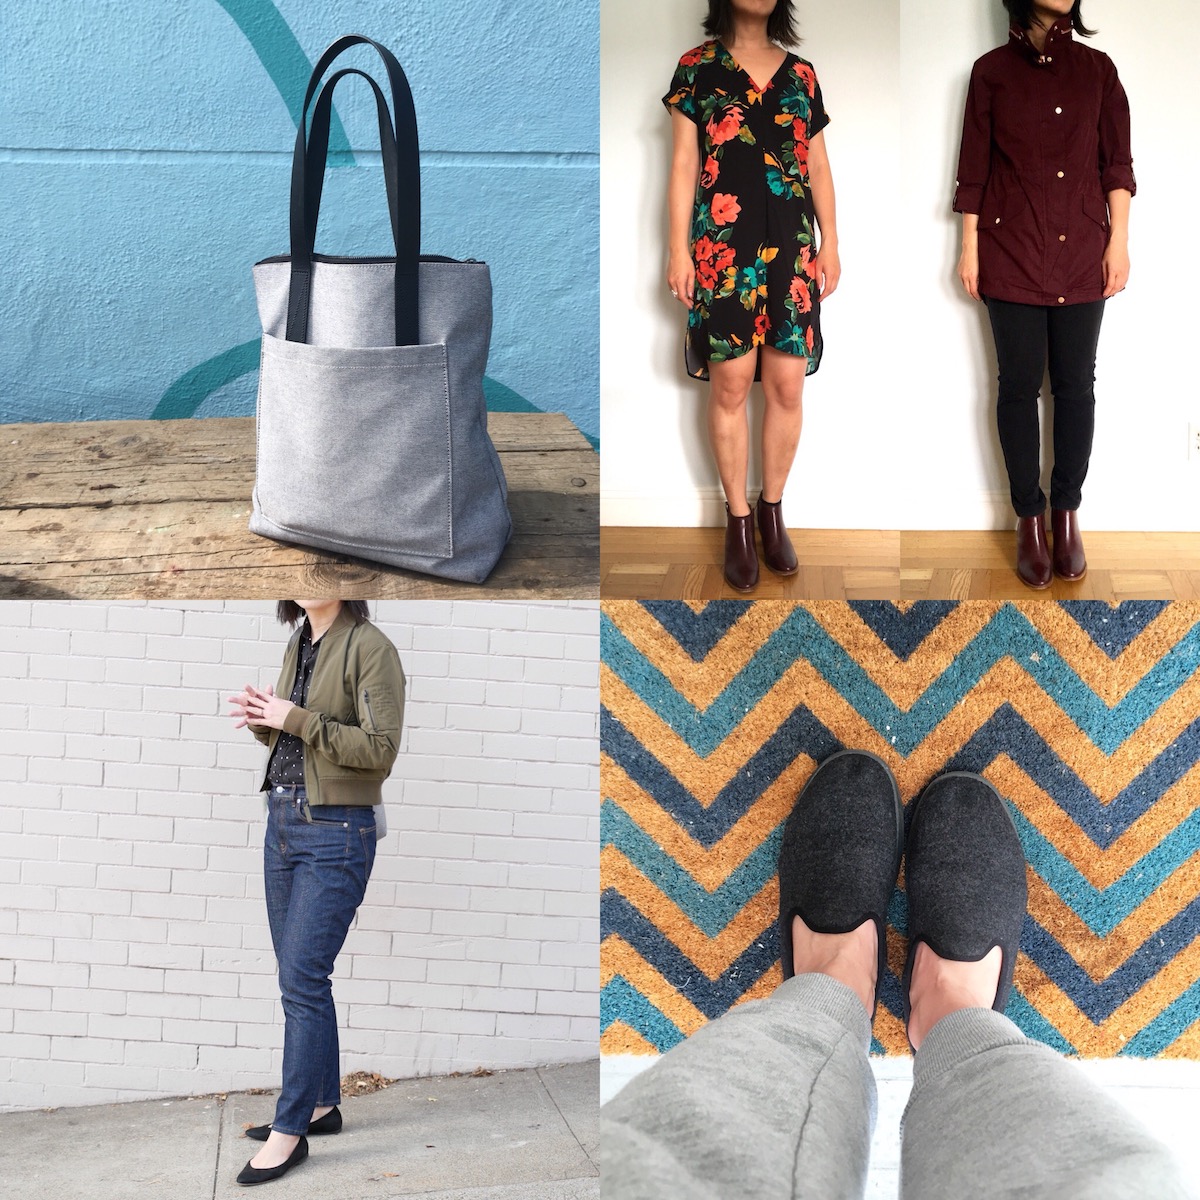 Top Welcome Objects posts of 2017, featuring a totebag, some outfits, some shoes.